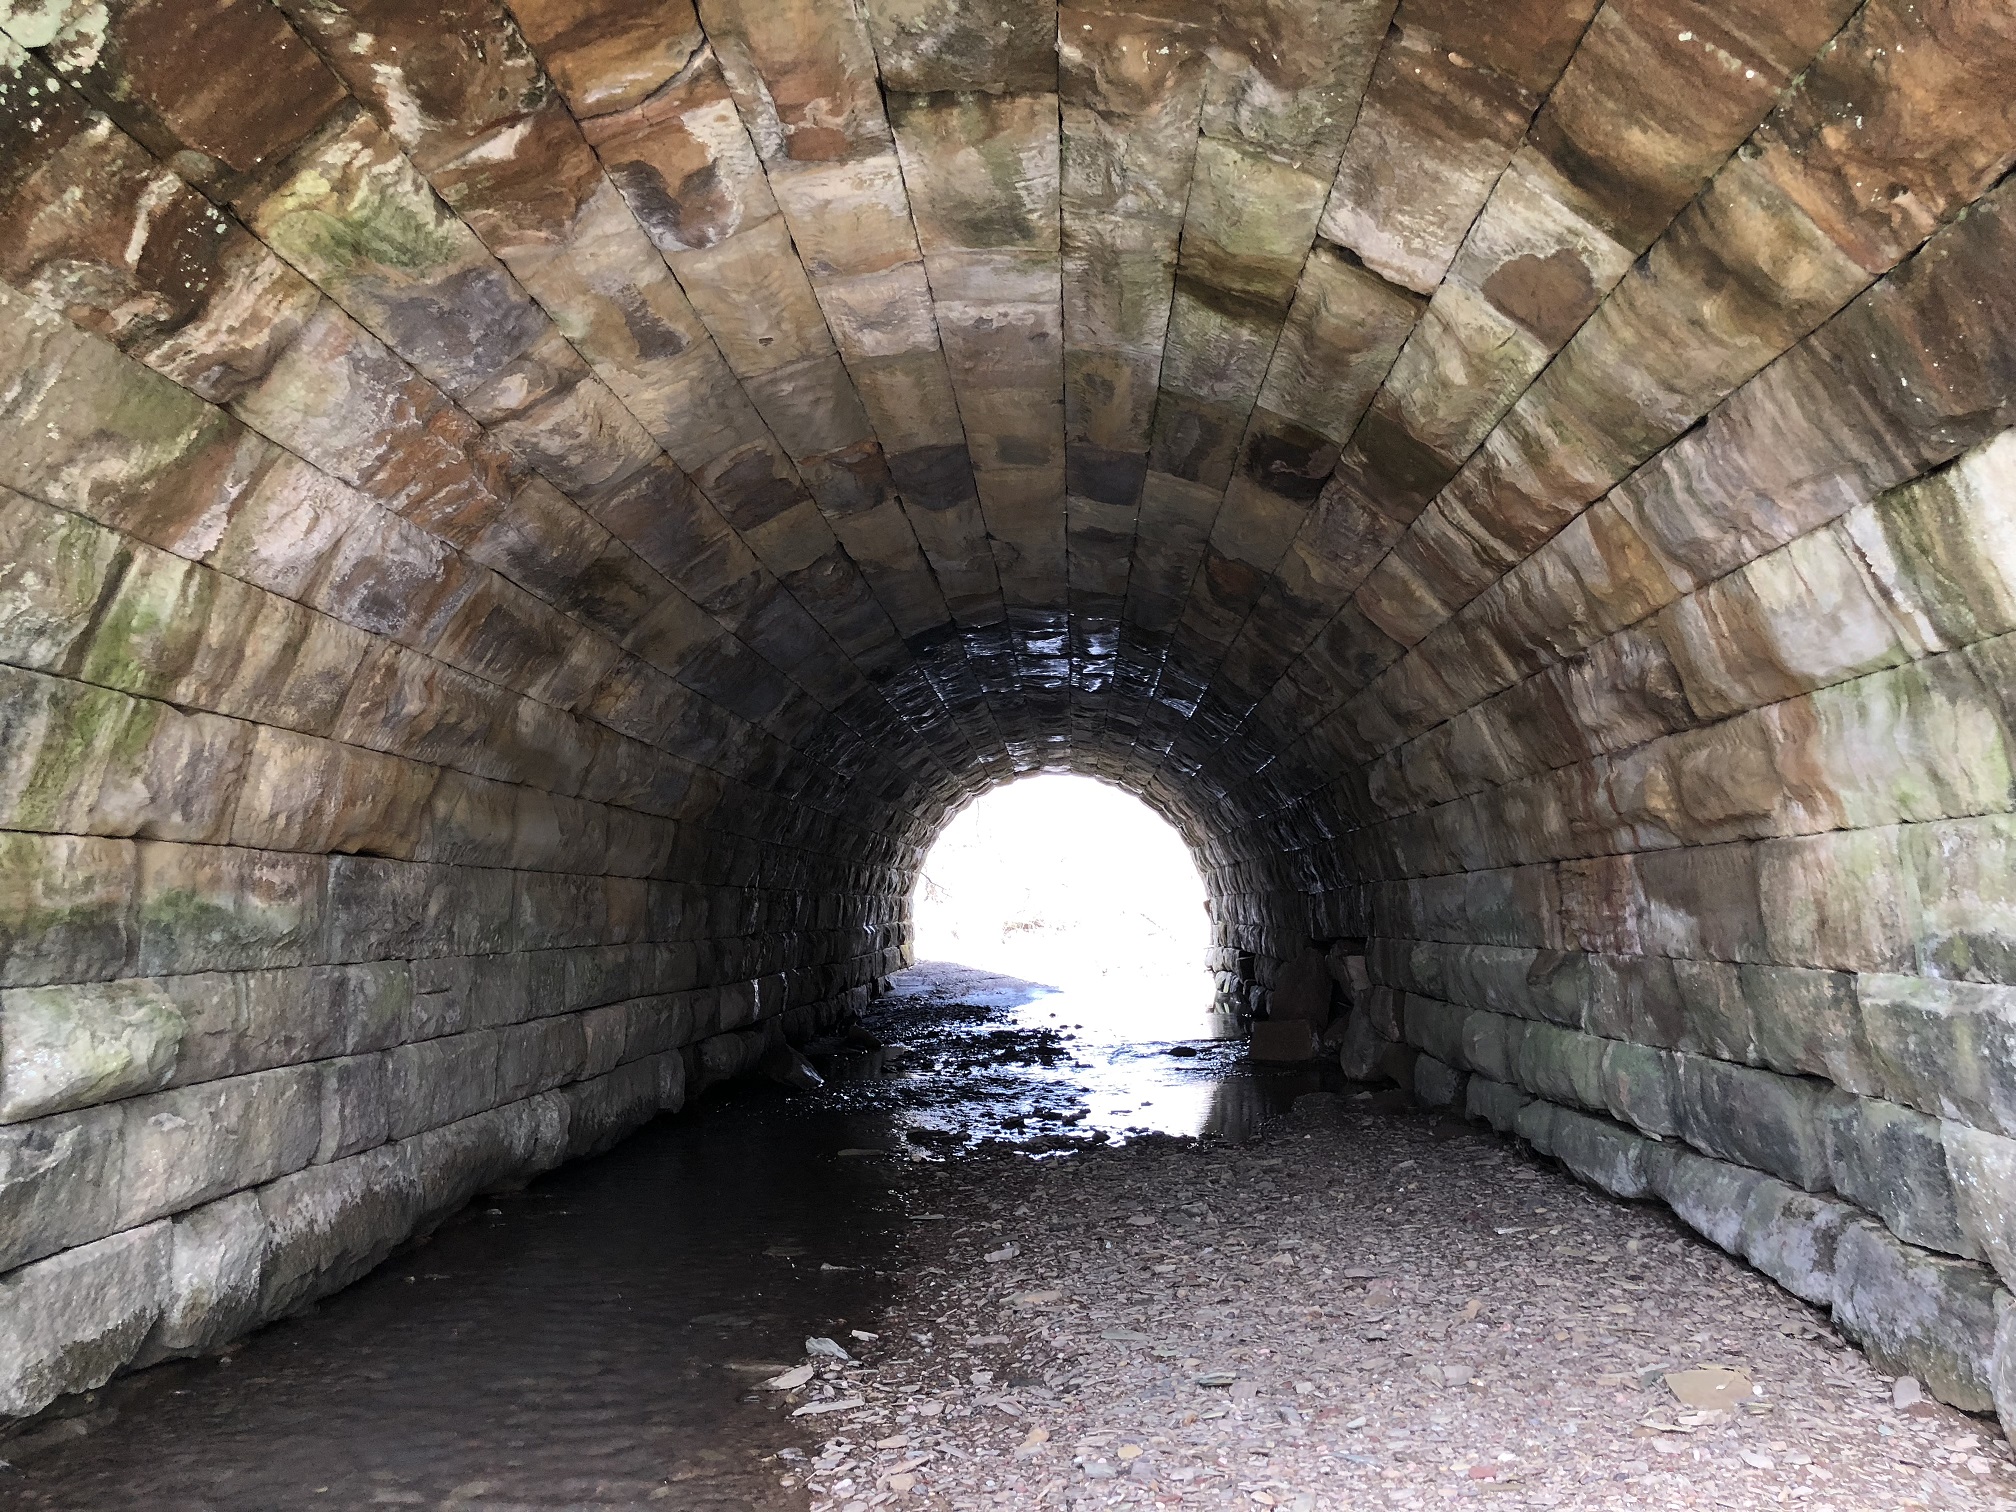 Roddy Road Tunnel April 6, 2018, looking up tunnel from southern opening